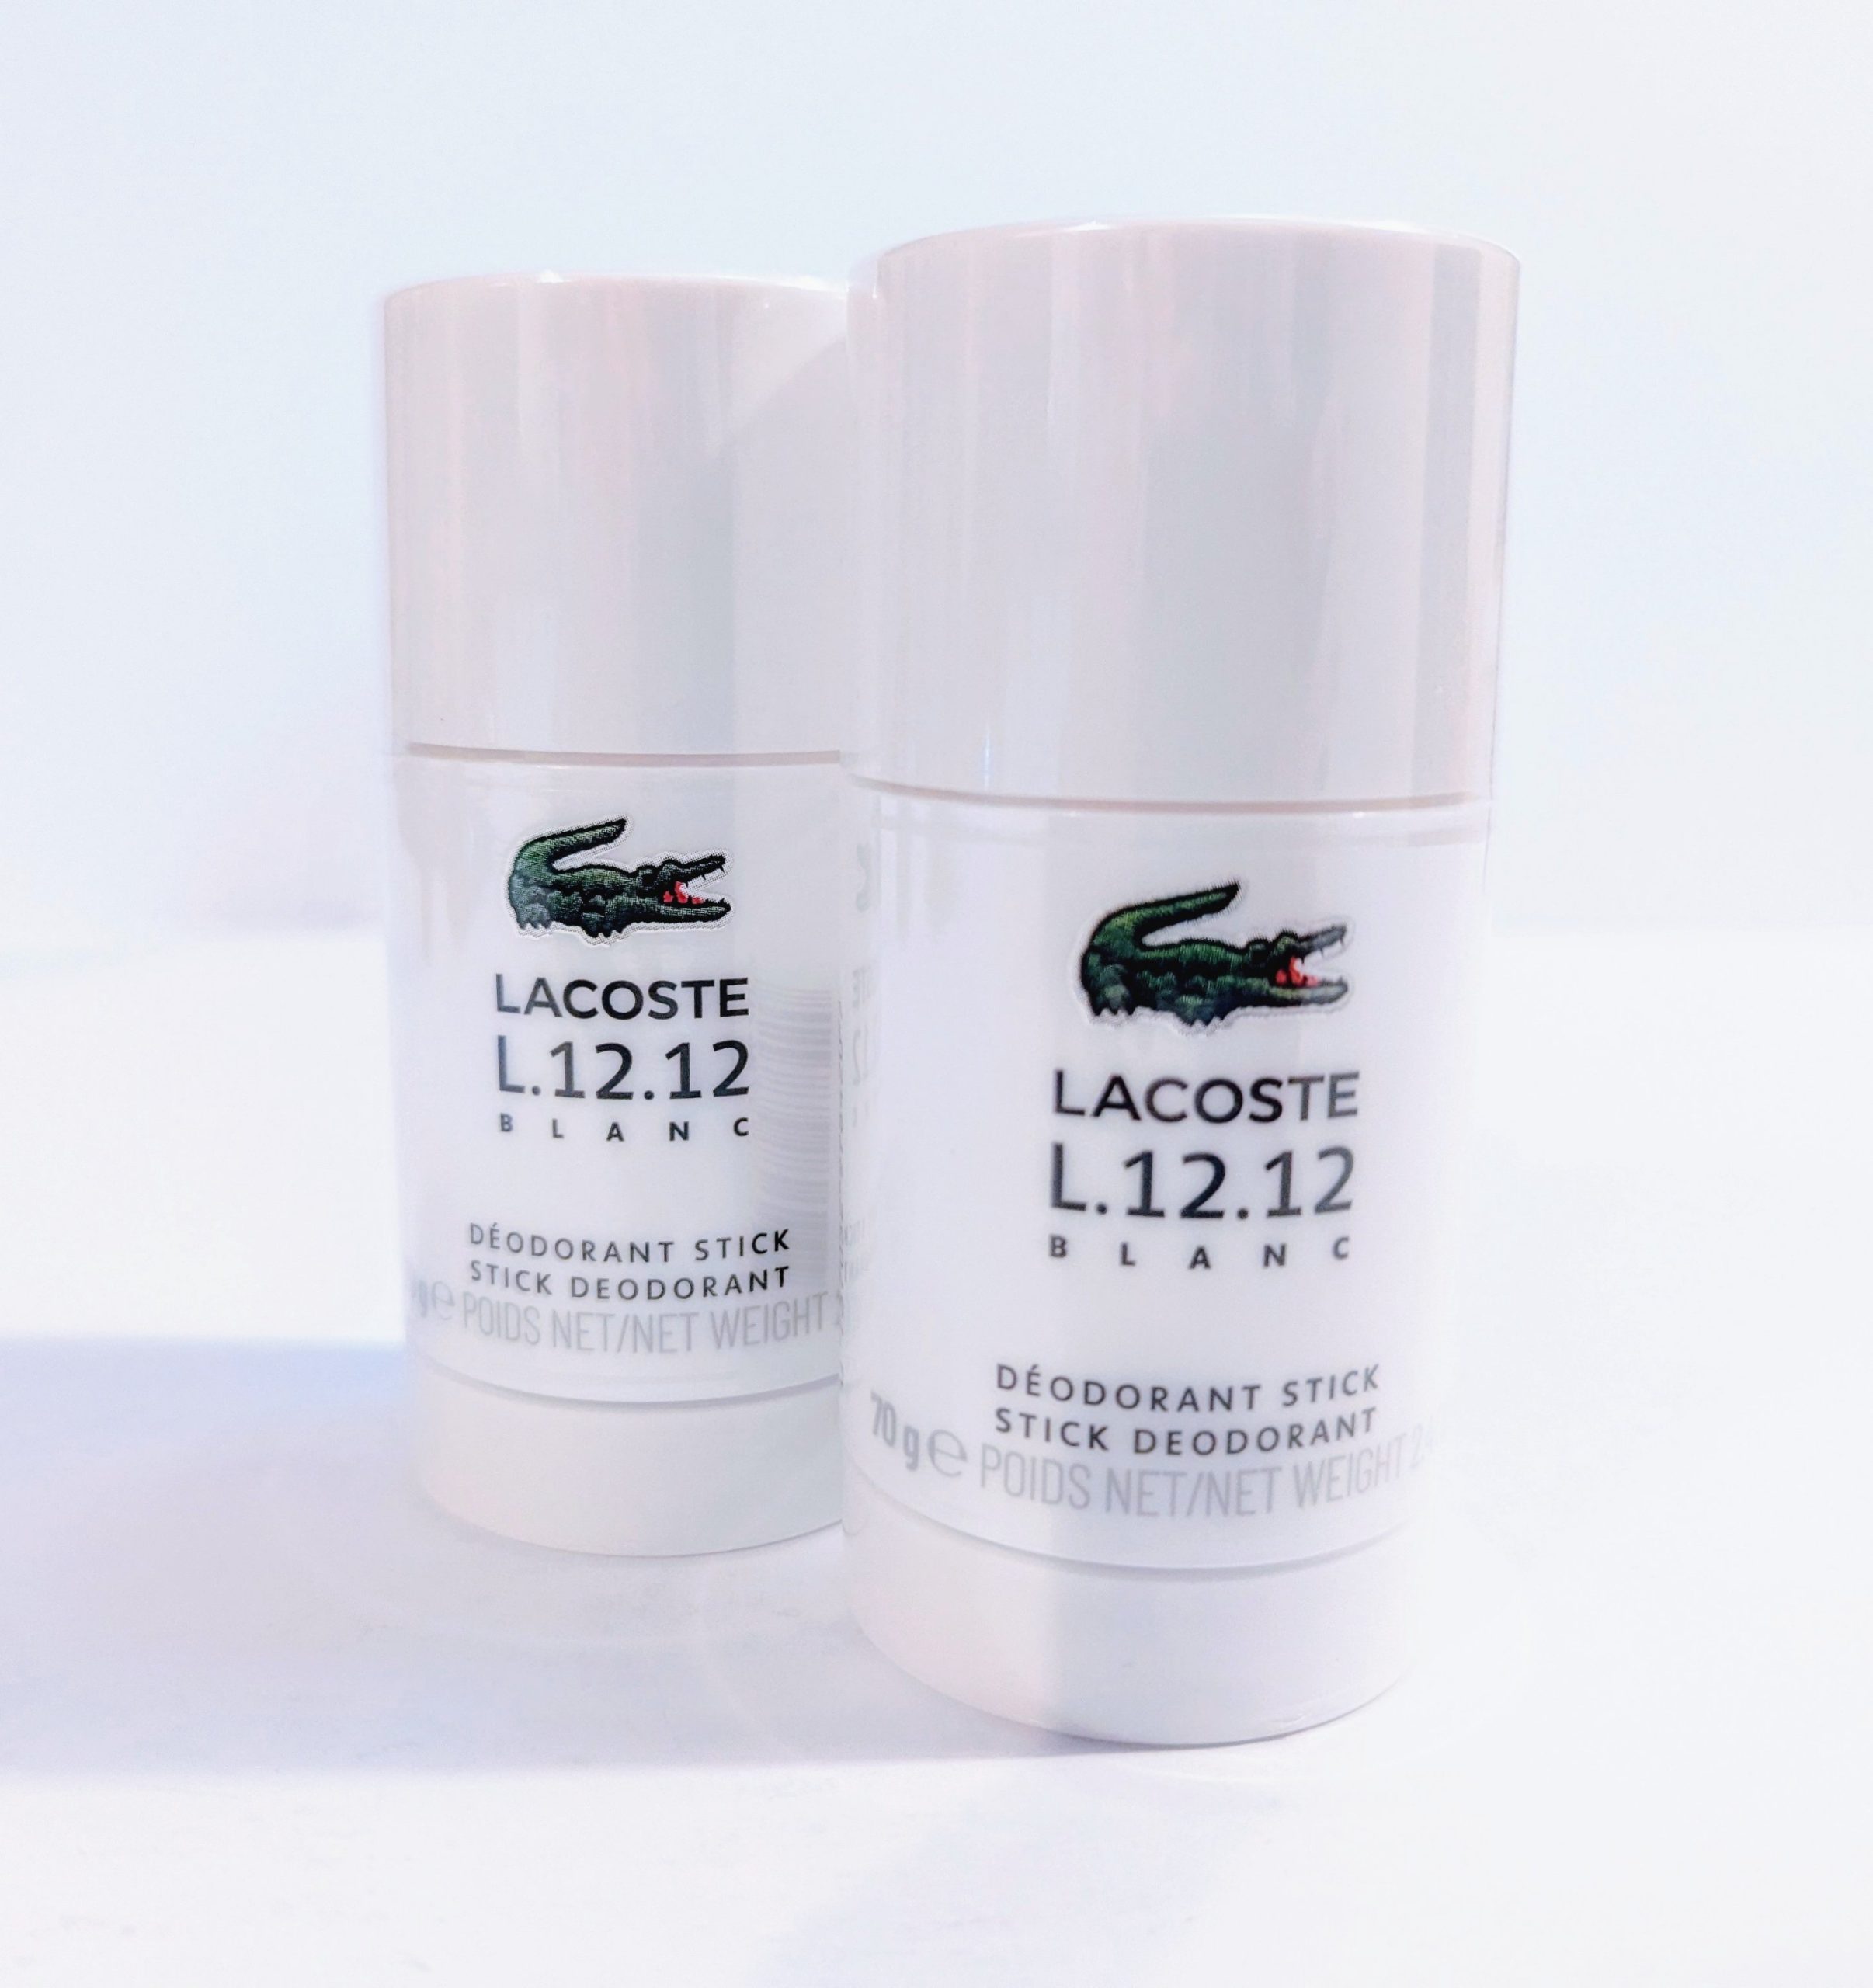 Two Lacoste L.12.12 Blanc Pure Deodorant Sticks on a white surface.